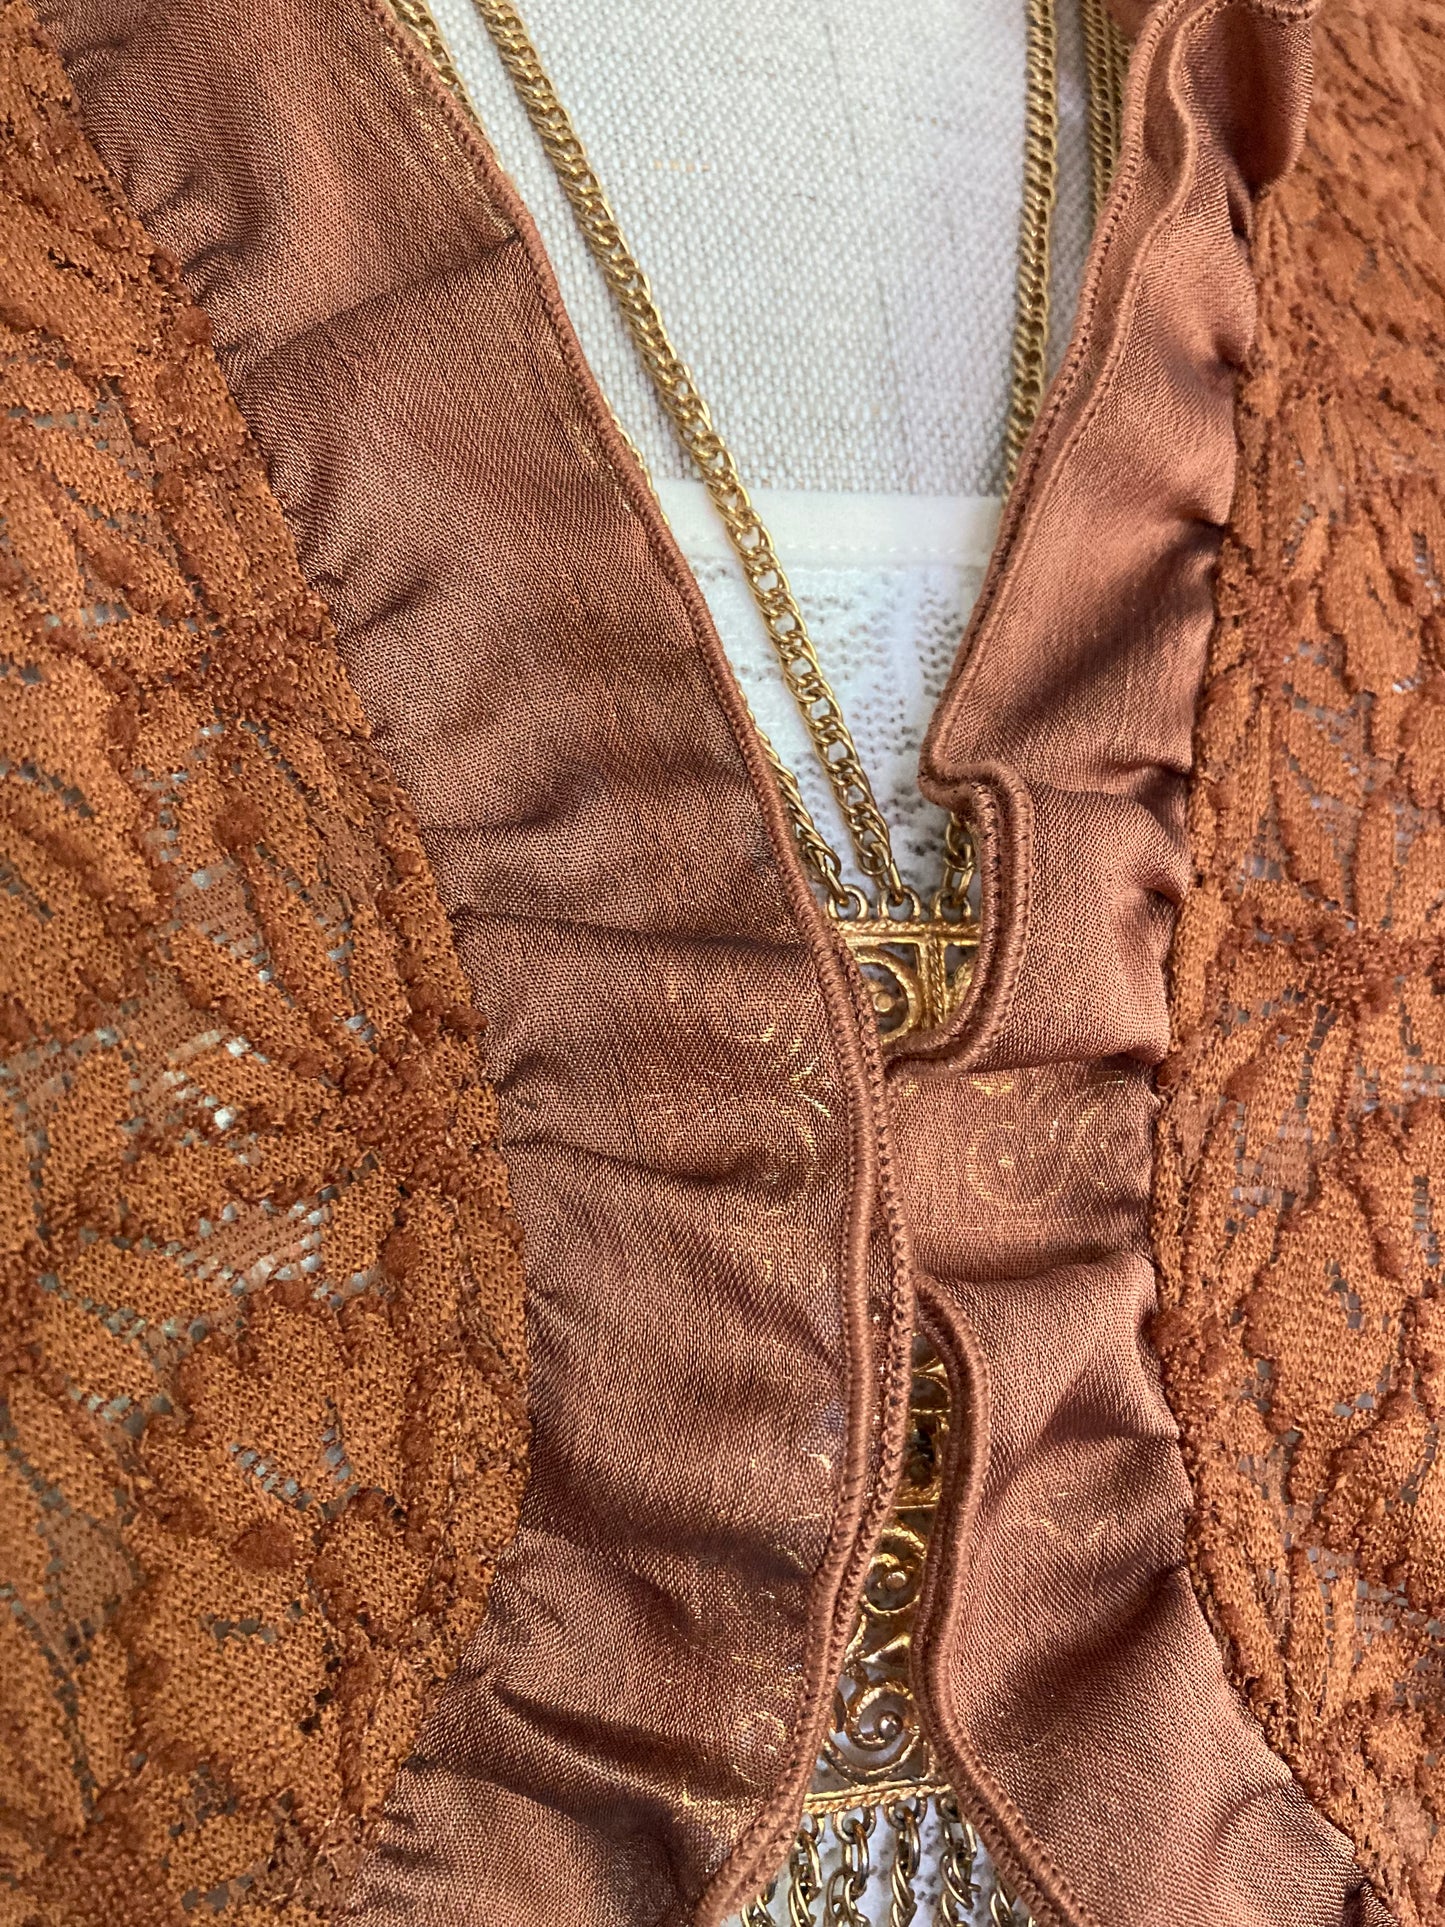 Lace Bolero with Bell Sleeves, Size M